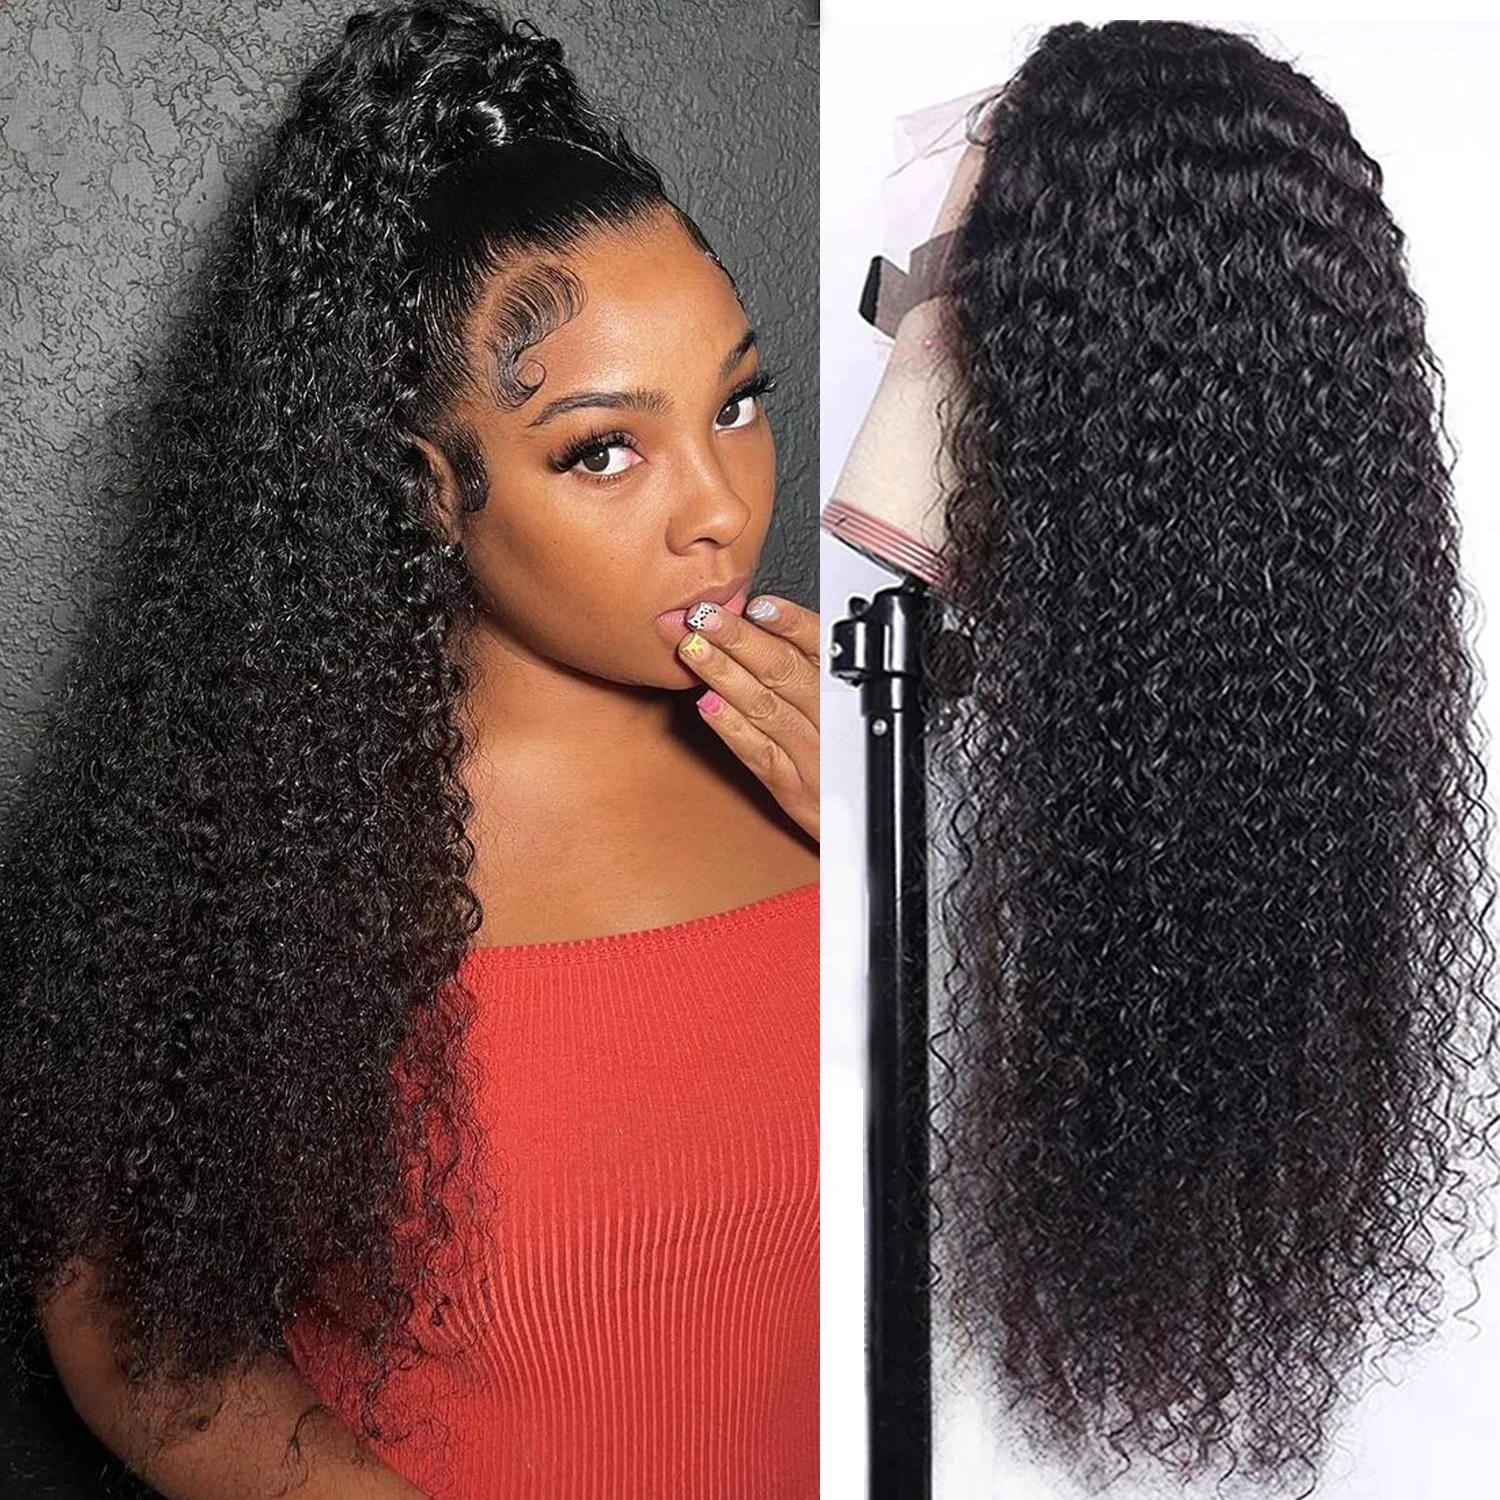 28 30 32 Inch Curly Deep Wave Lace Front Human Hair Wigs 13x4 Glueless Brazilian Frontal Closure Wig Density 180 For Black Women